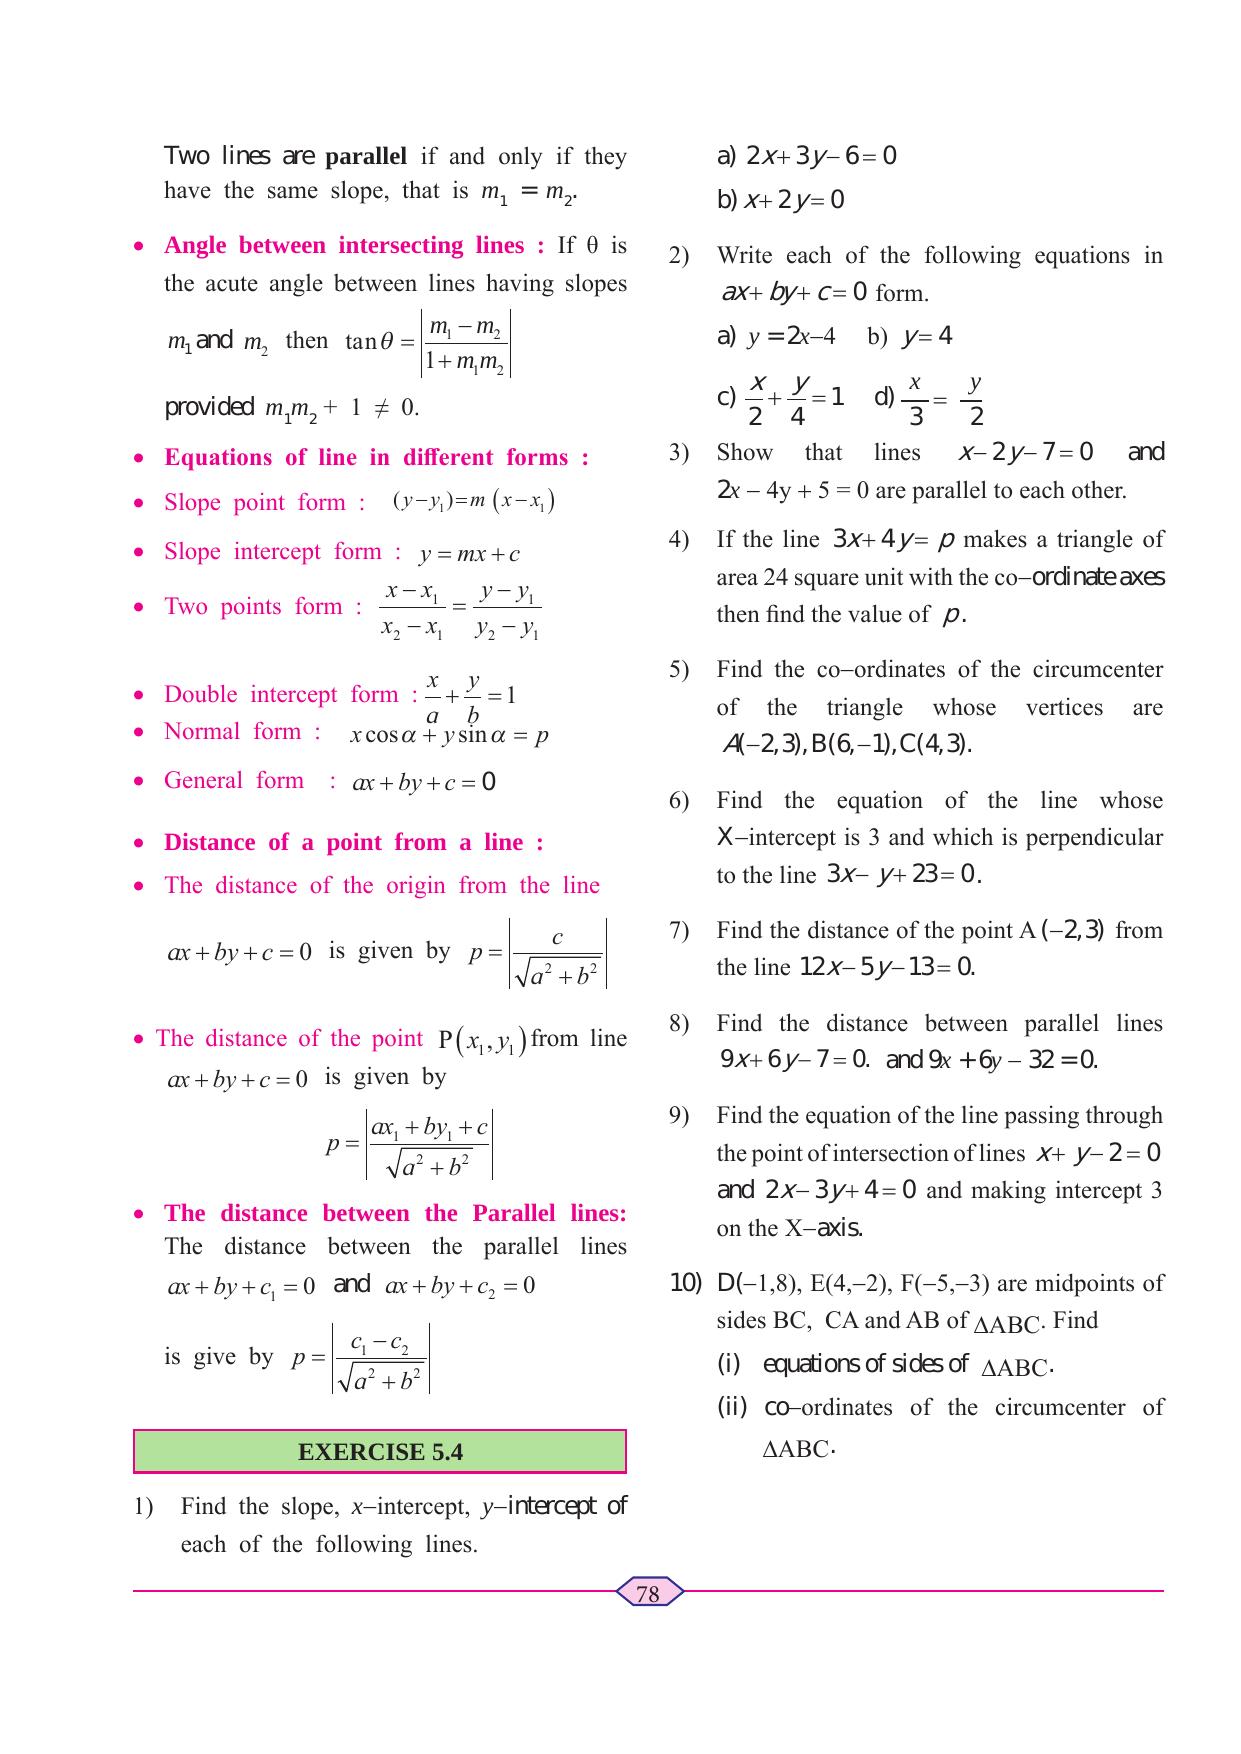 Maharashtra Board Class 11 Maths (Commerce) (Part 1) Textbook - Page 88